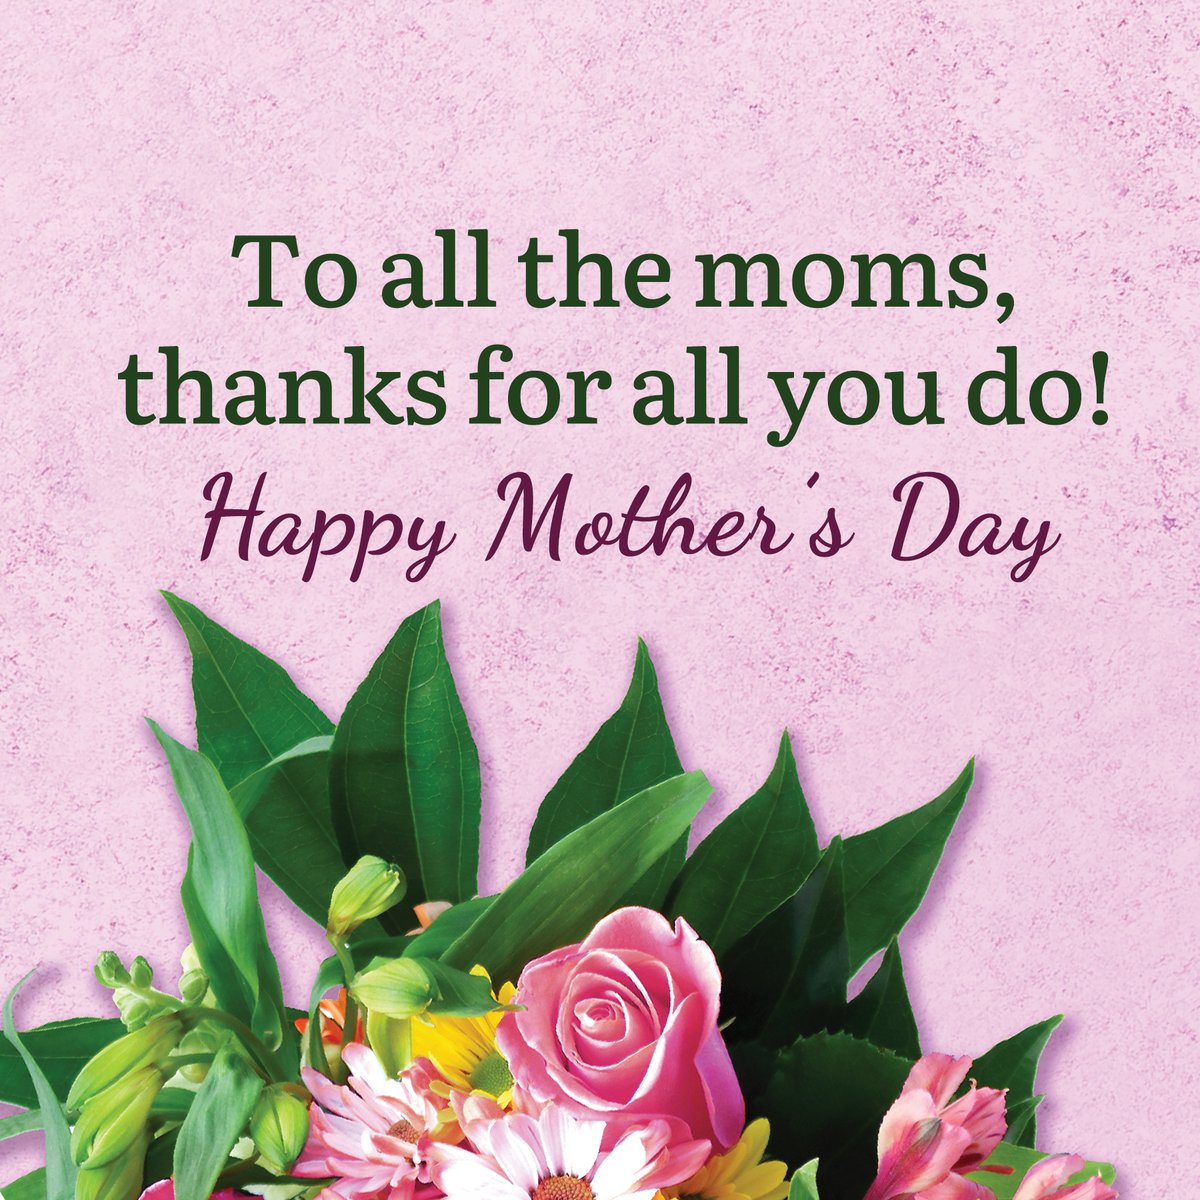 From all of us at @gladstonemonews to all of the awesome, hardworking, dedicated mommas out there, THANK YOU!!